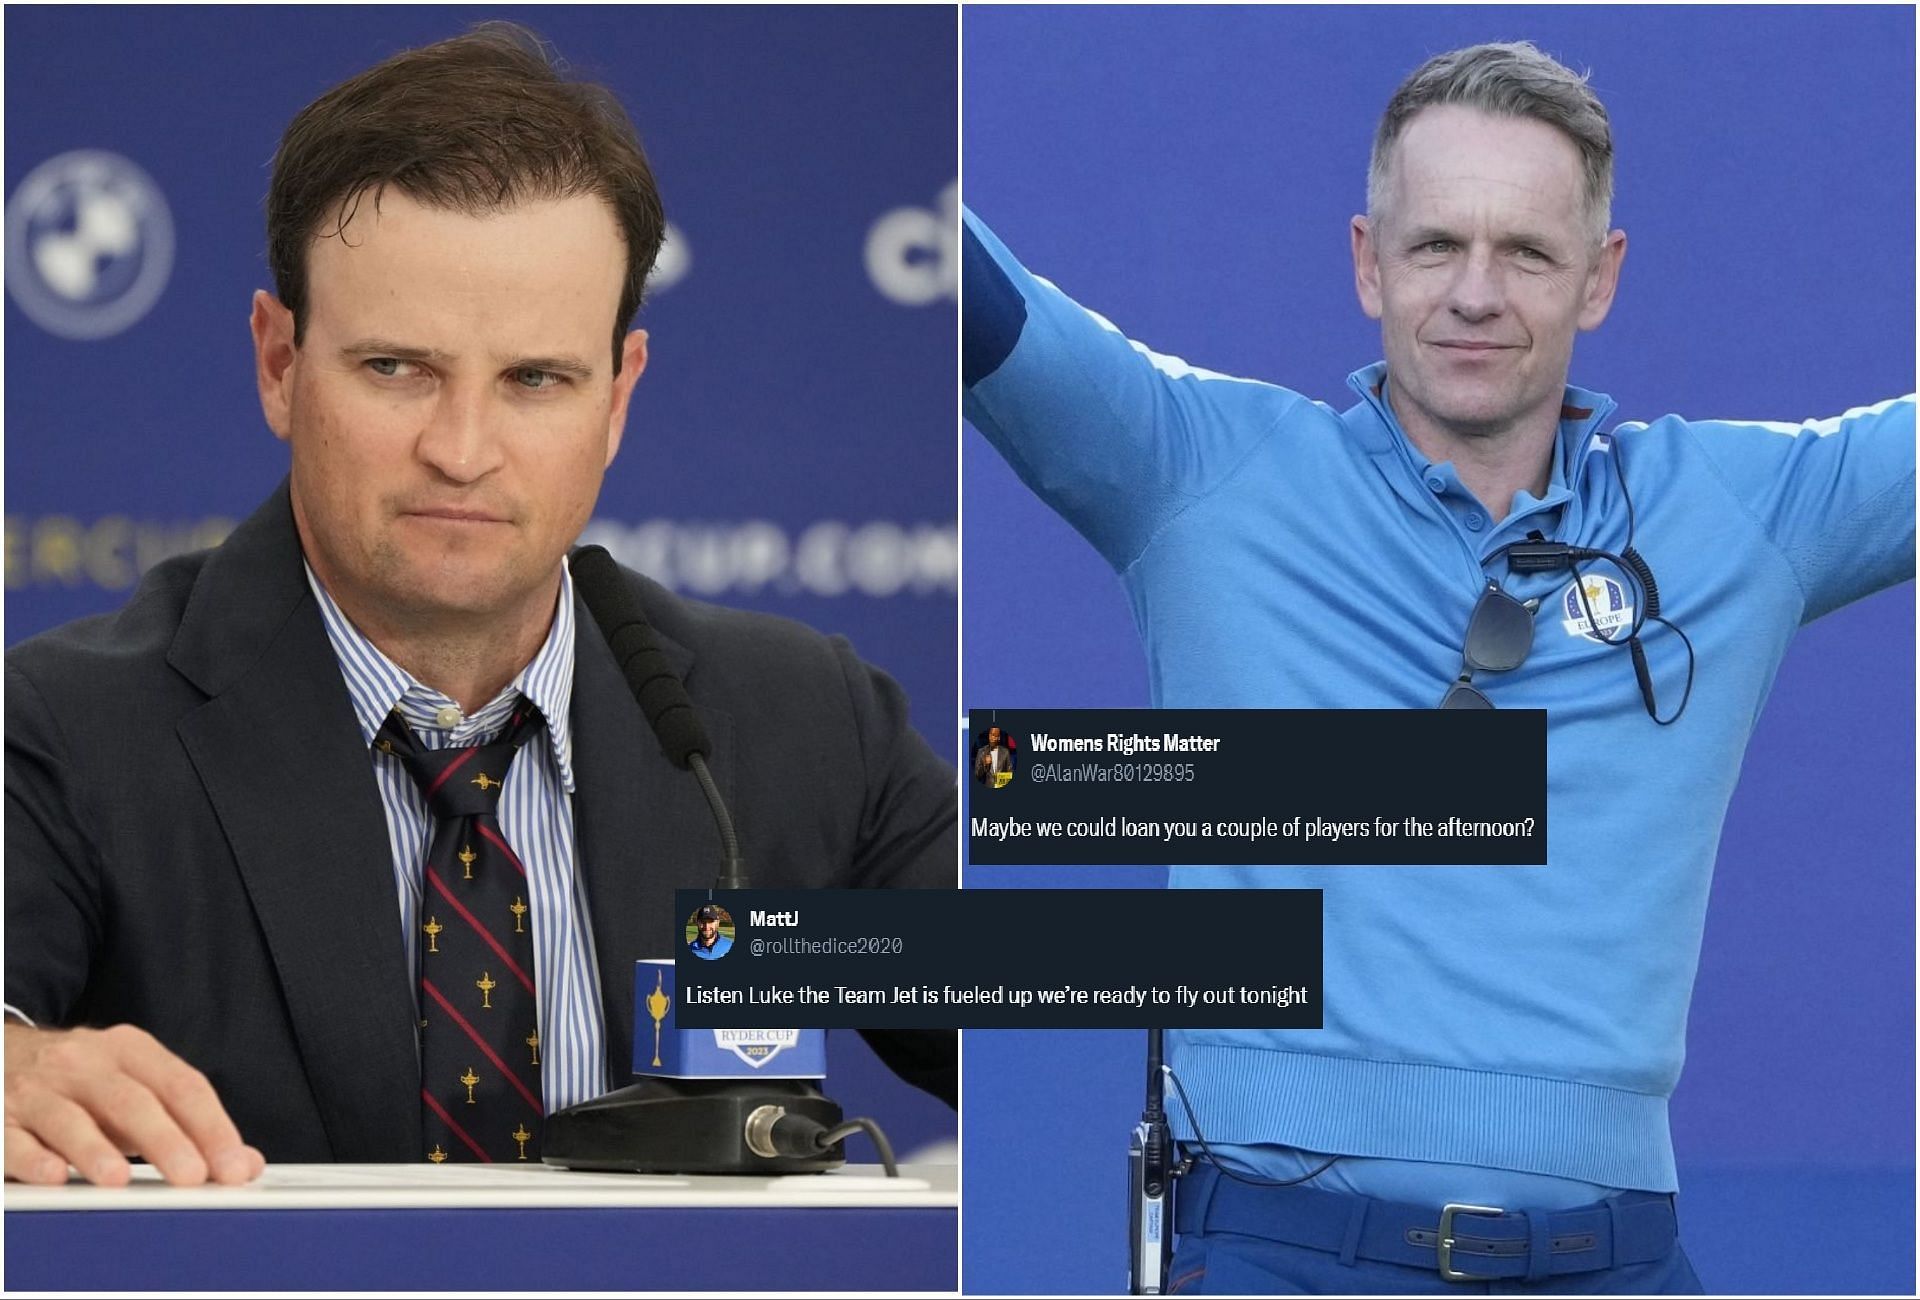 Zach Johnson and Luke Donald at the Ryder Cup (via Getty Images)